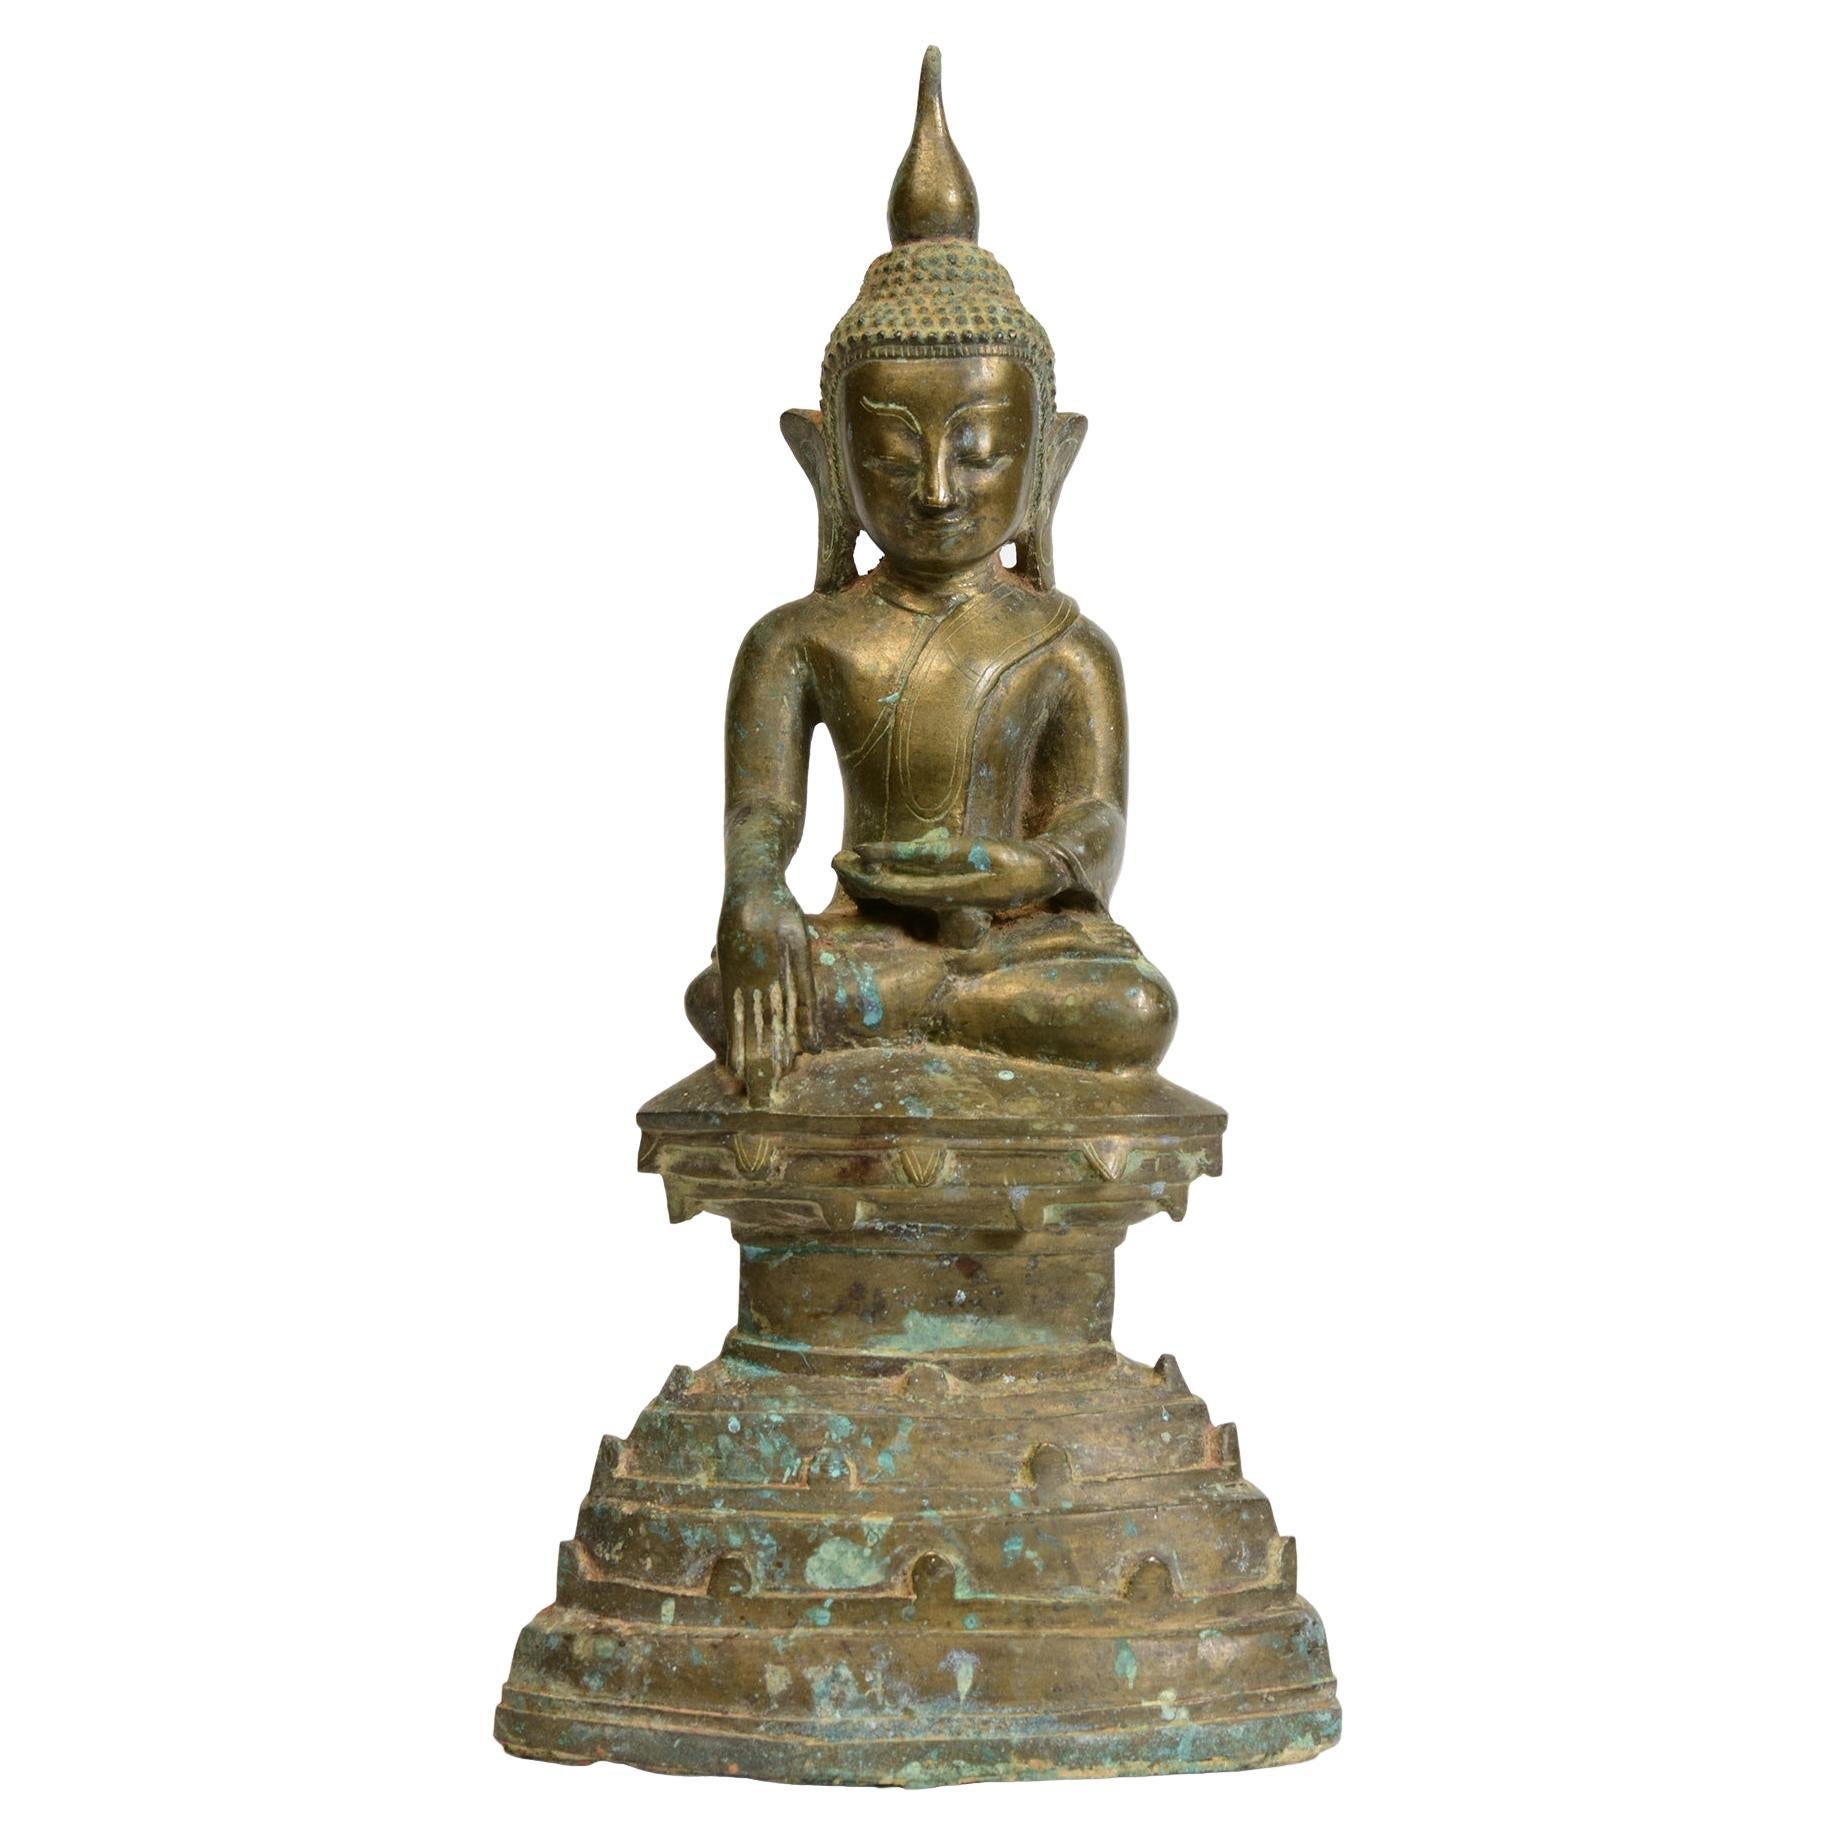 17th Century, Early Shan, Antique Burmese Bronze Seated Buddha For Sale